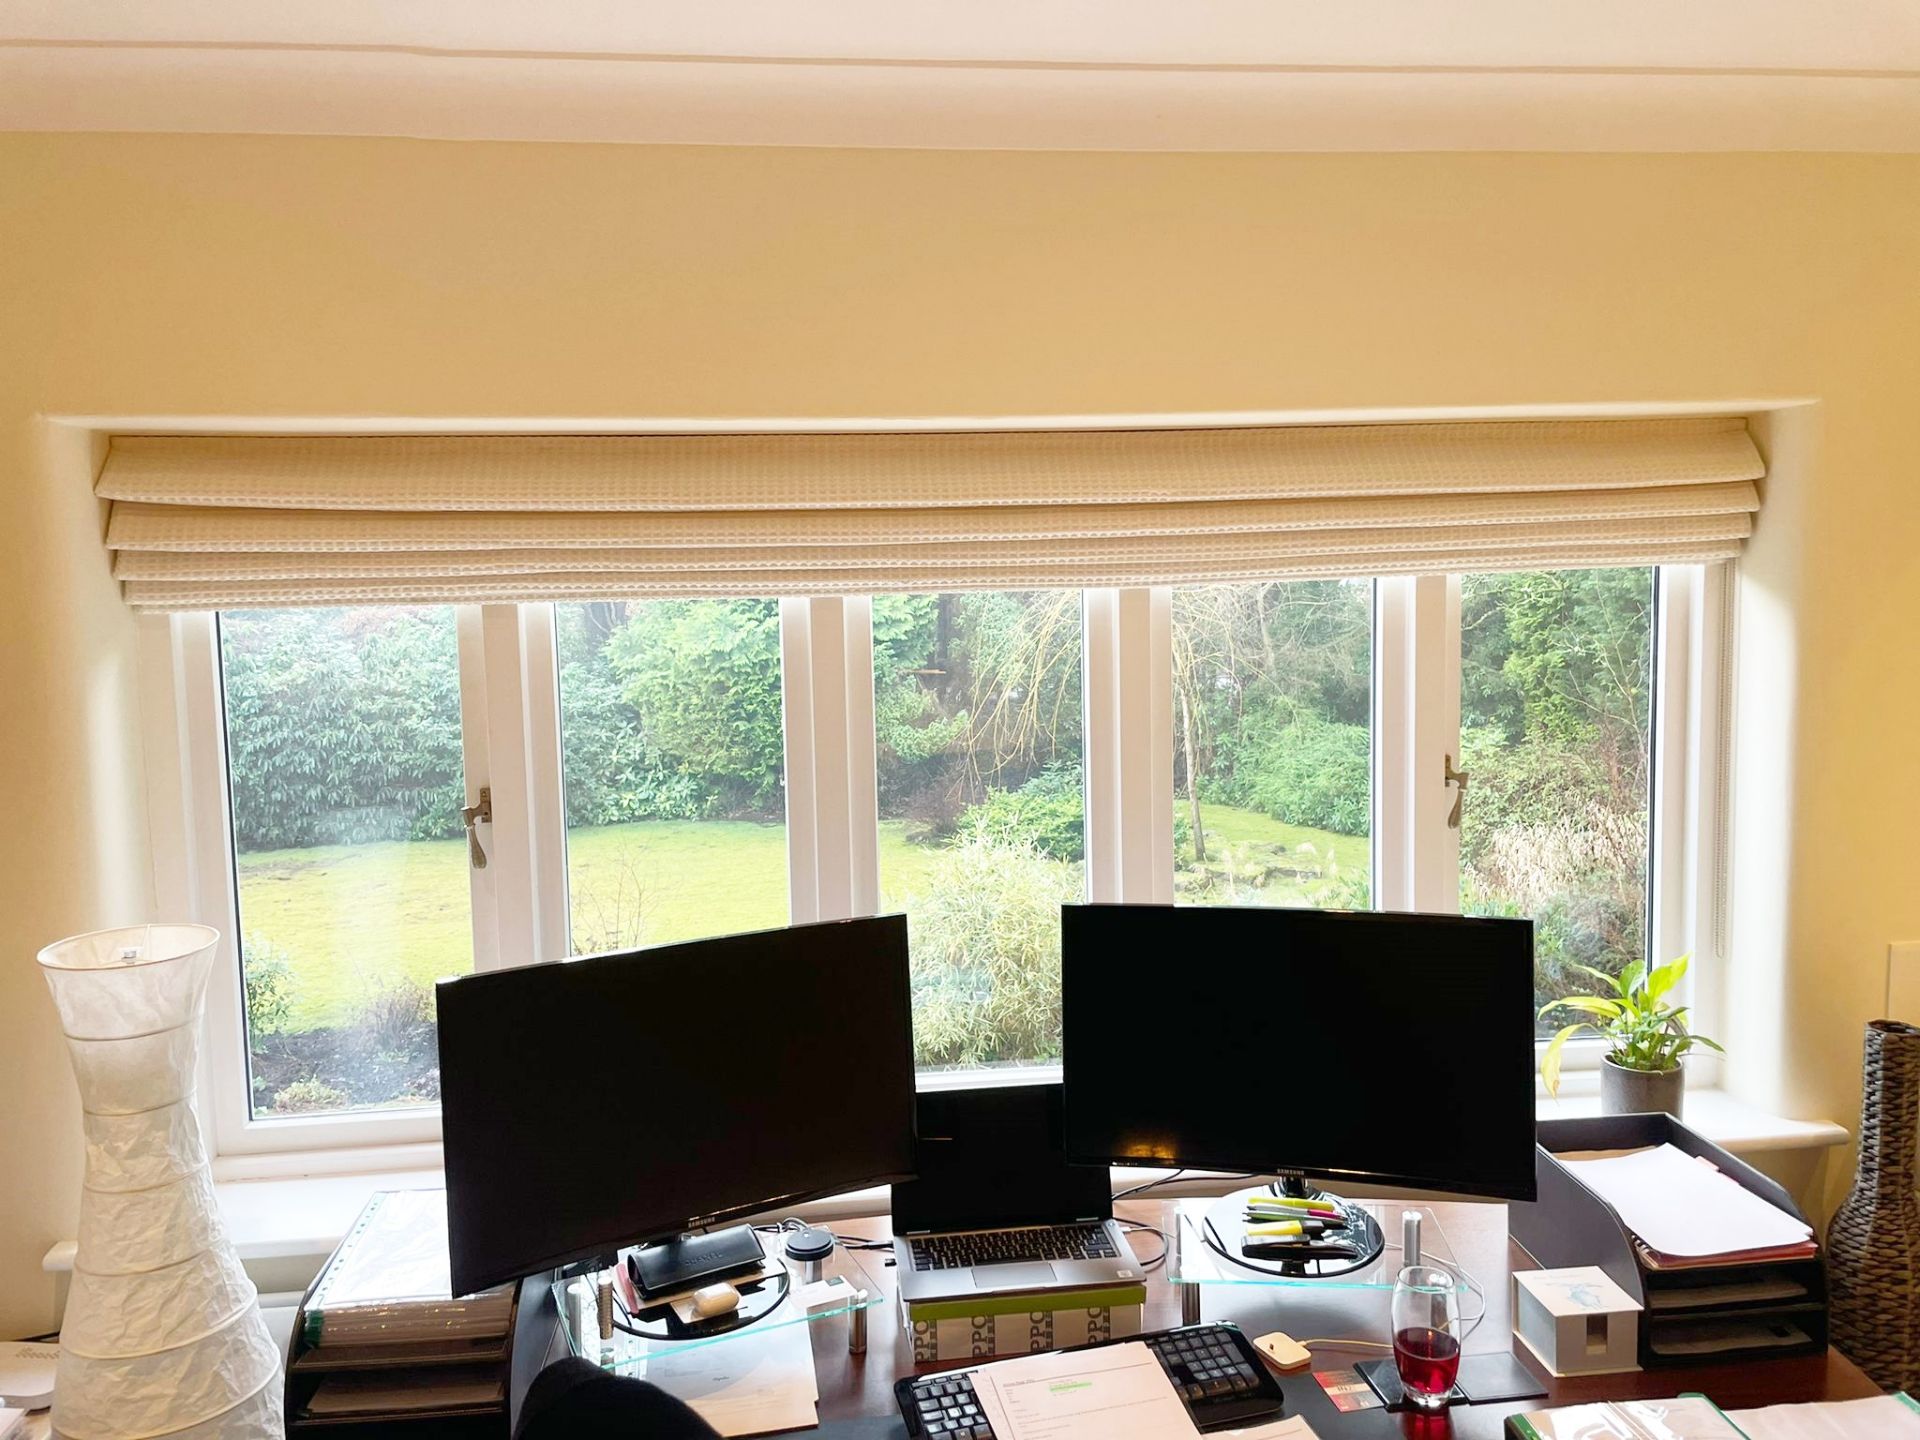 2 x Bespoke Handmade Bedroom Rollerblinds - To Be Removed From An Exclusive Property In Hale Barns - Image 9 of 9